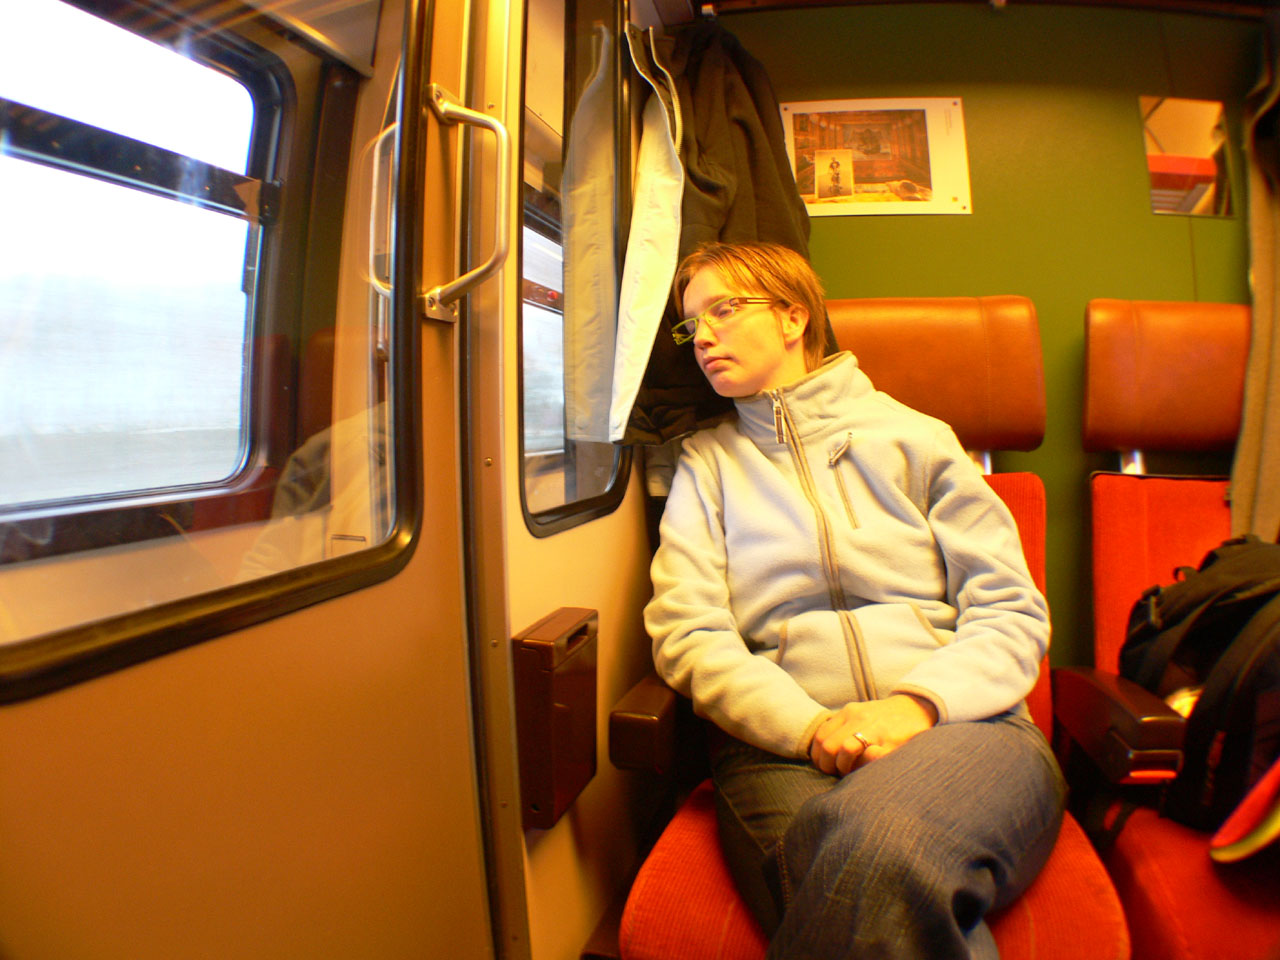 a woman with eye glasses sitting in a train car